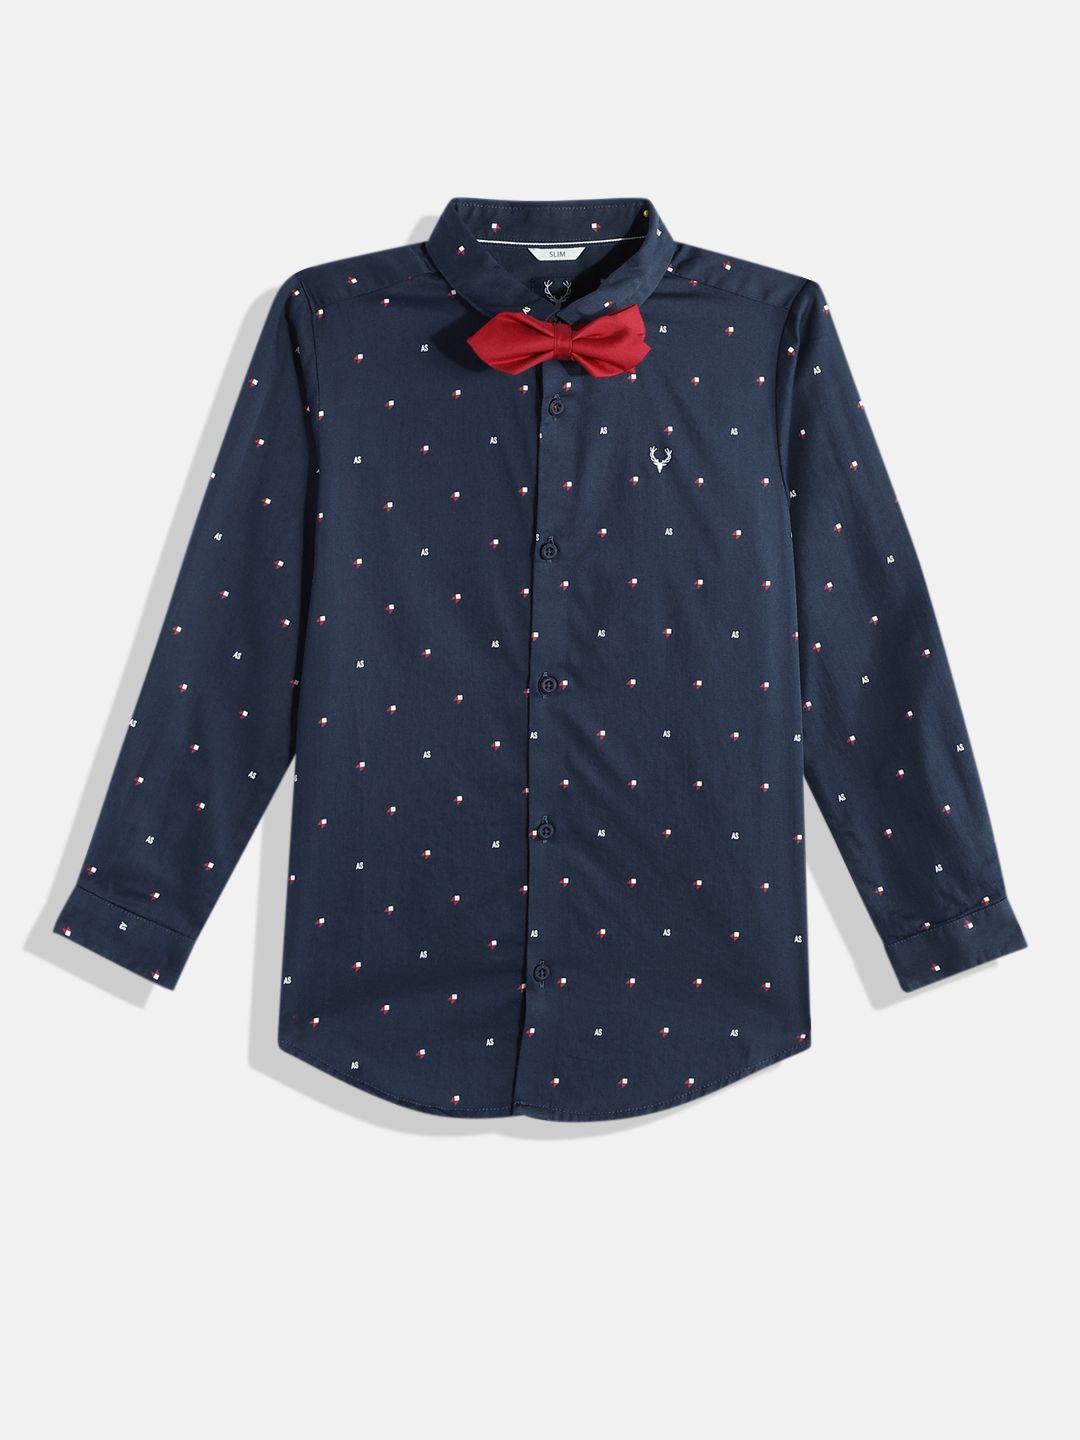 allen-solly-junior-boys-brand-logo-printed-pure-cotton-casual-shirt-with-a-bow